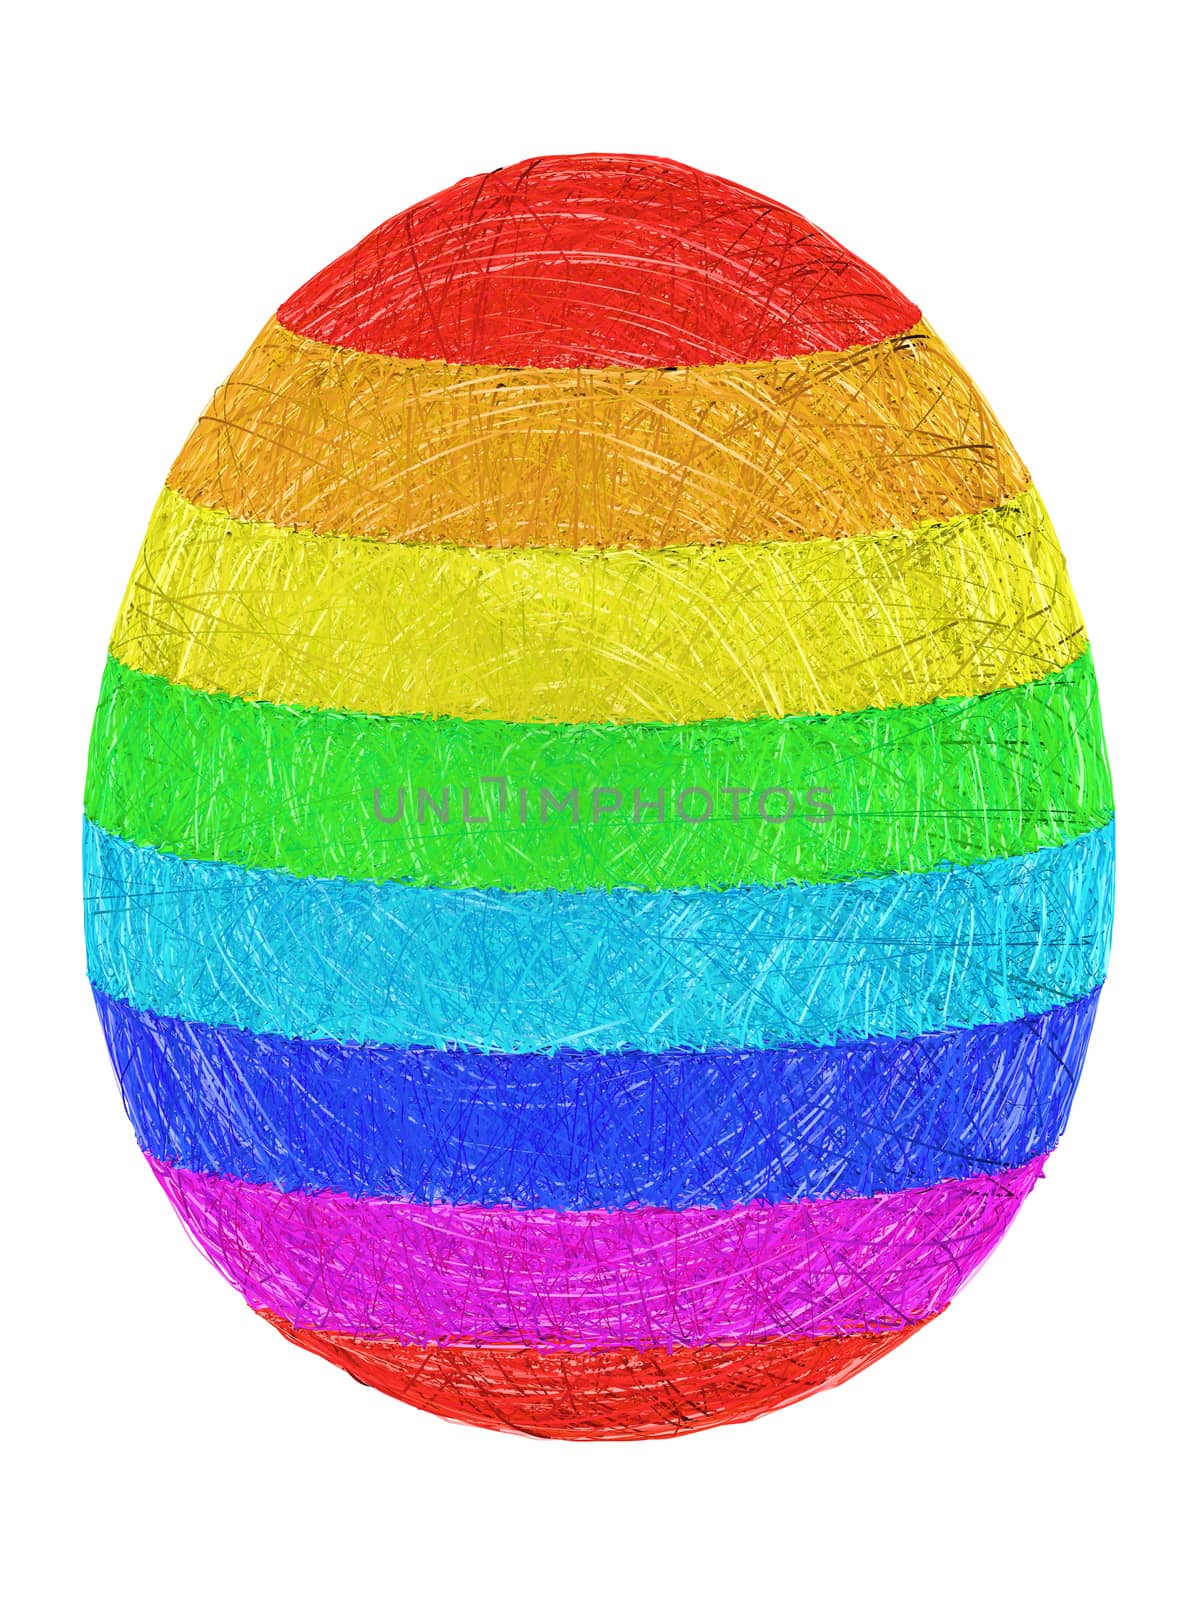 Easter egg composed of layers of colorful lines on white background. High resolution 3D image